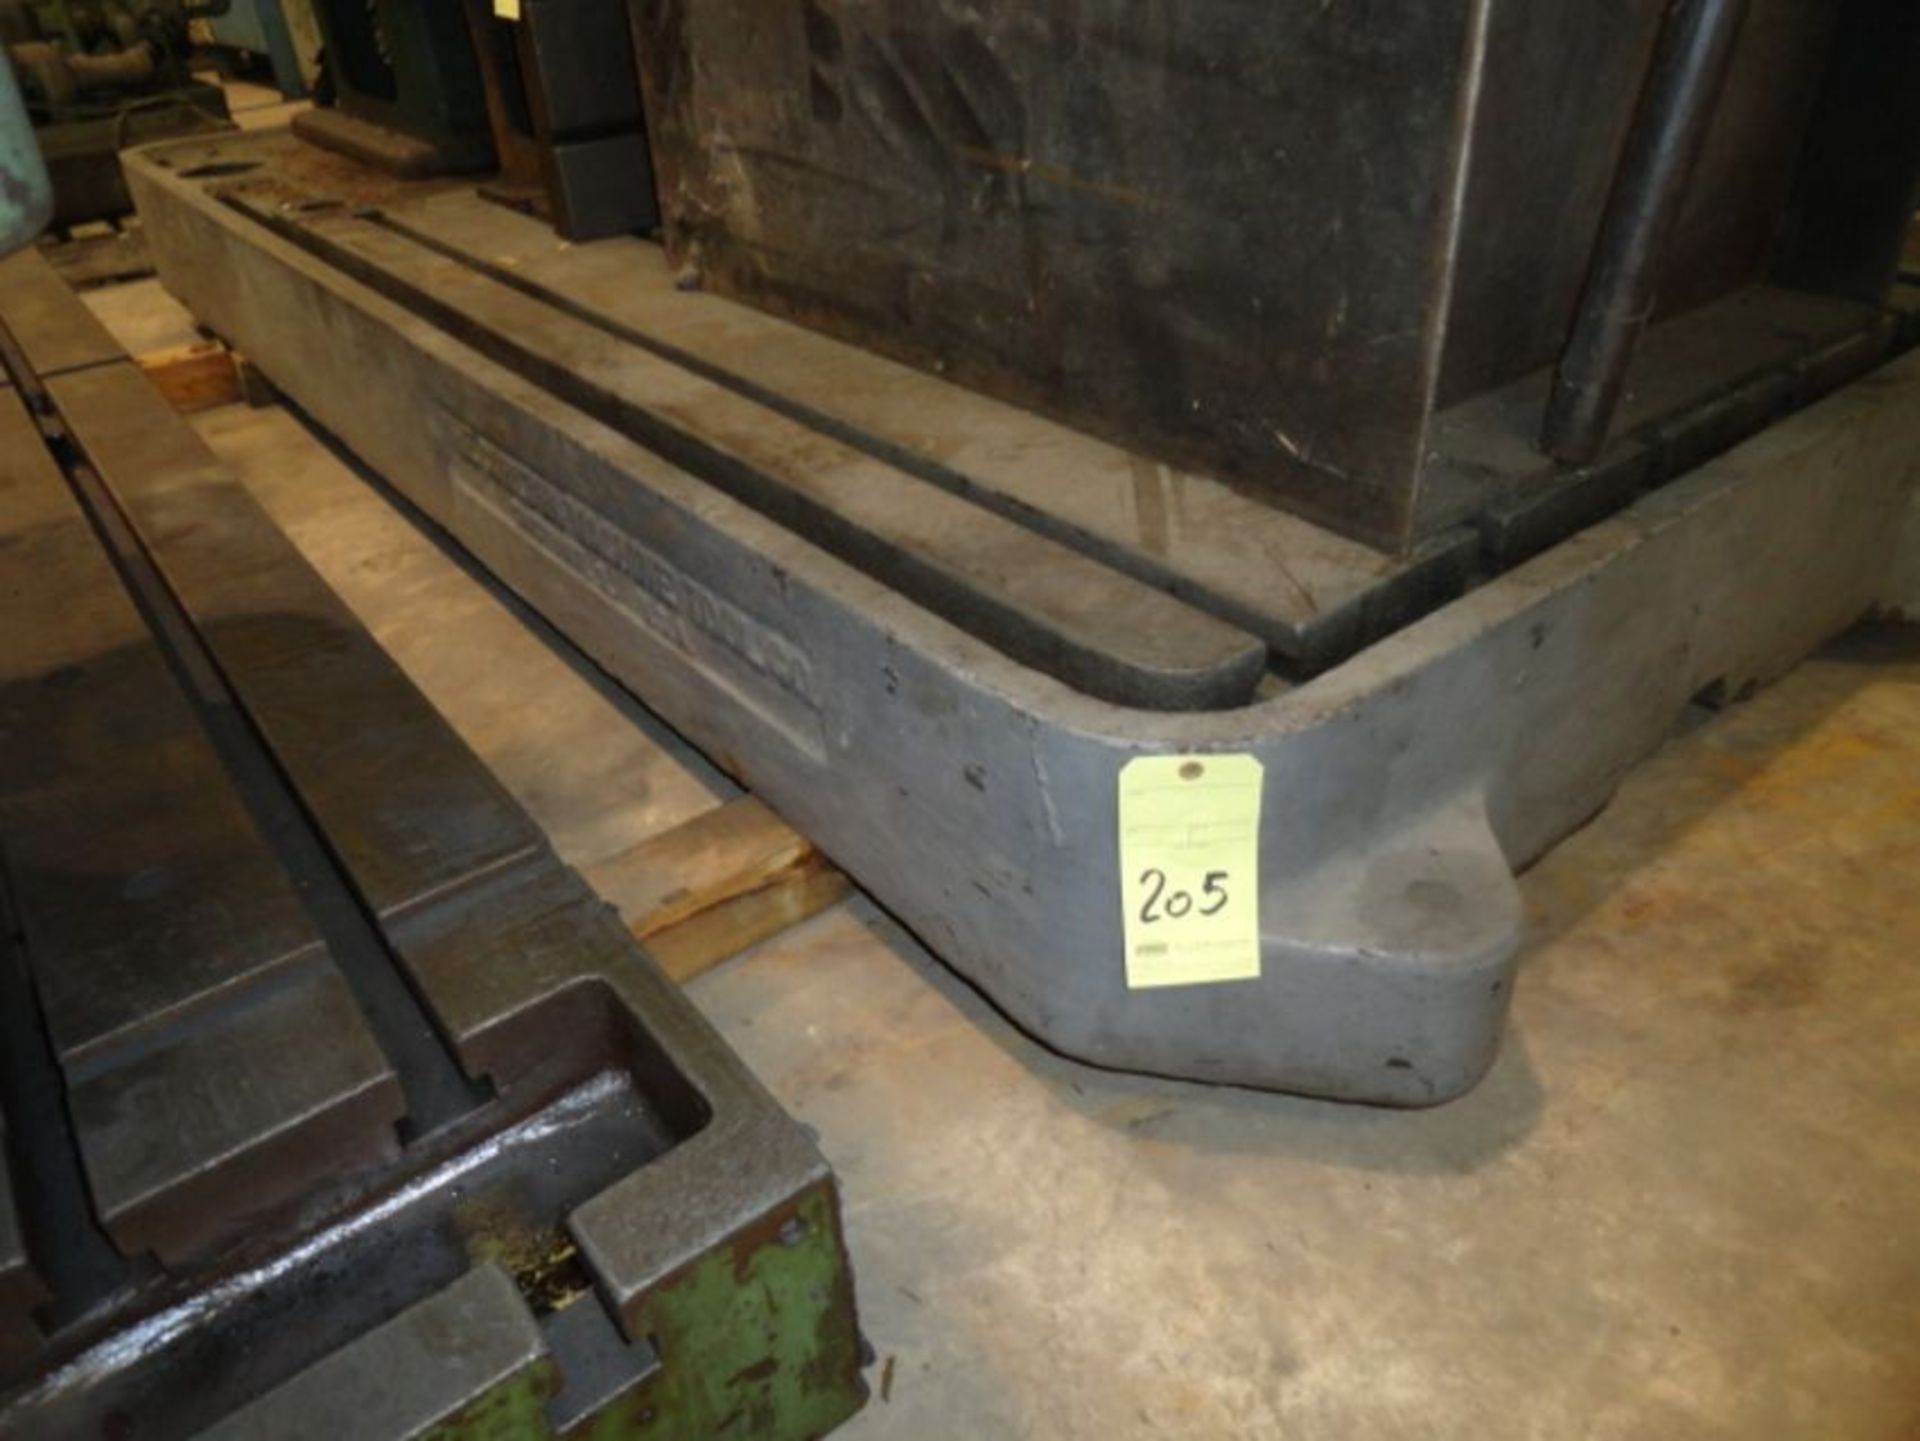 RADIAL DRILL BASE, CARLTON, 120" x 50" x 10" thk., T-slotted (base only) - Image 2 of 2